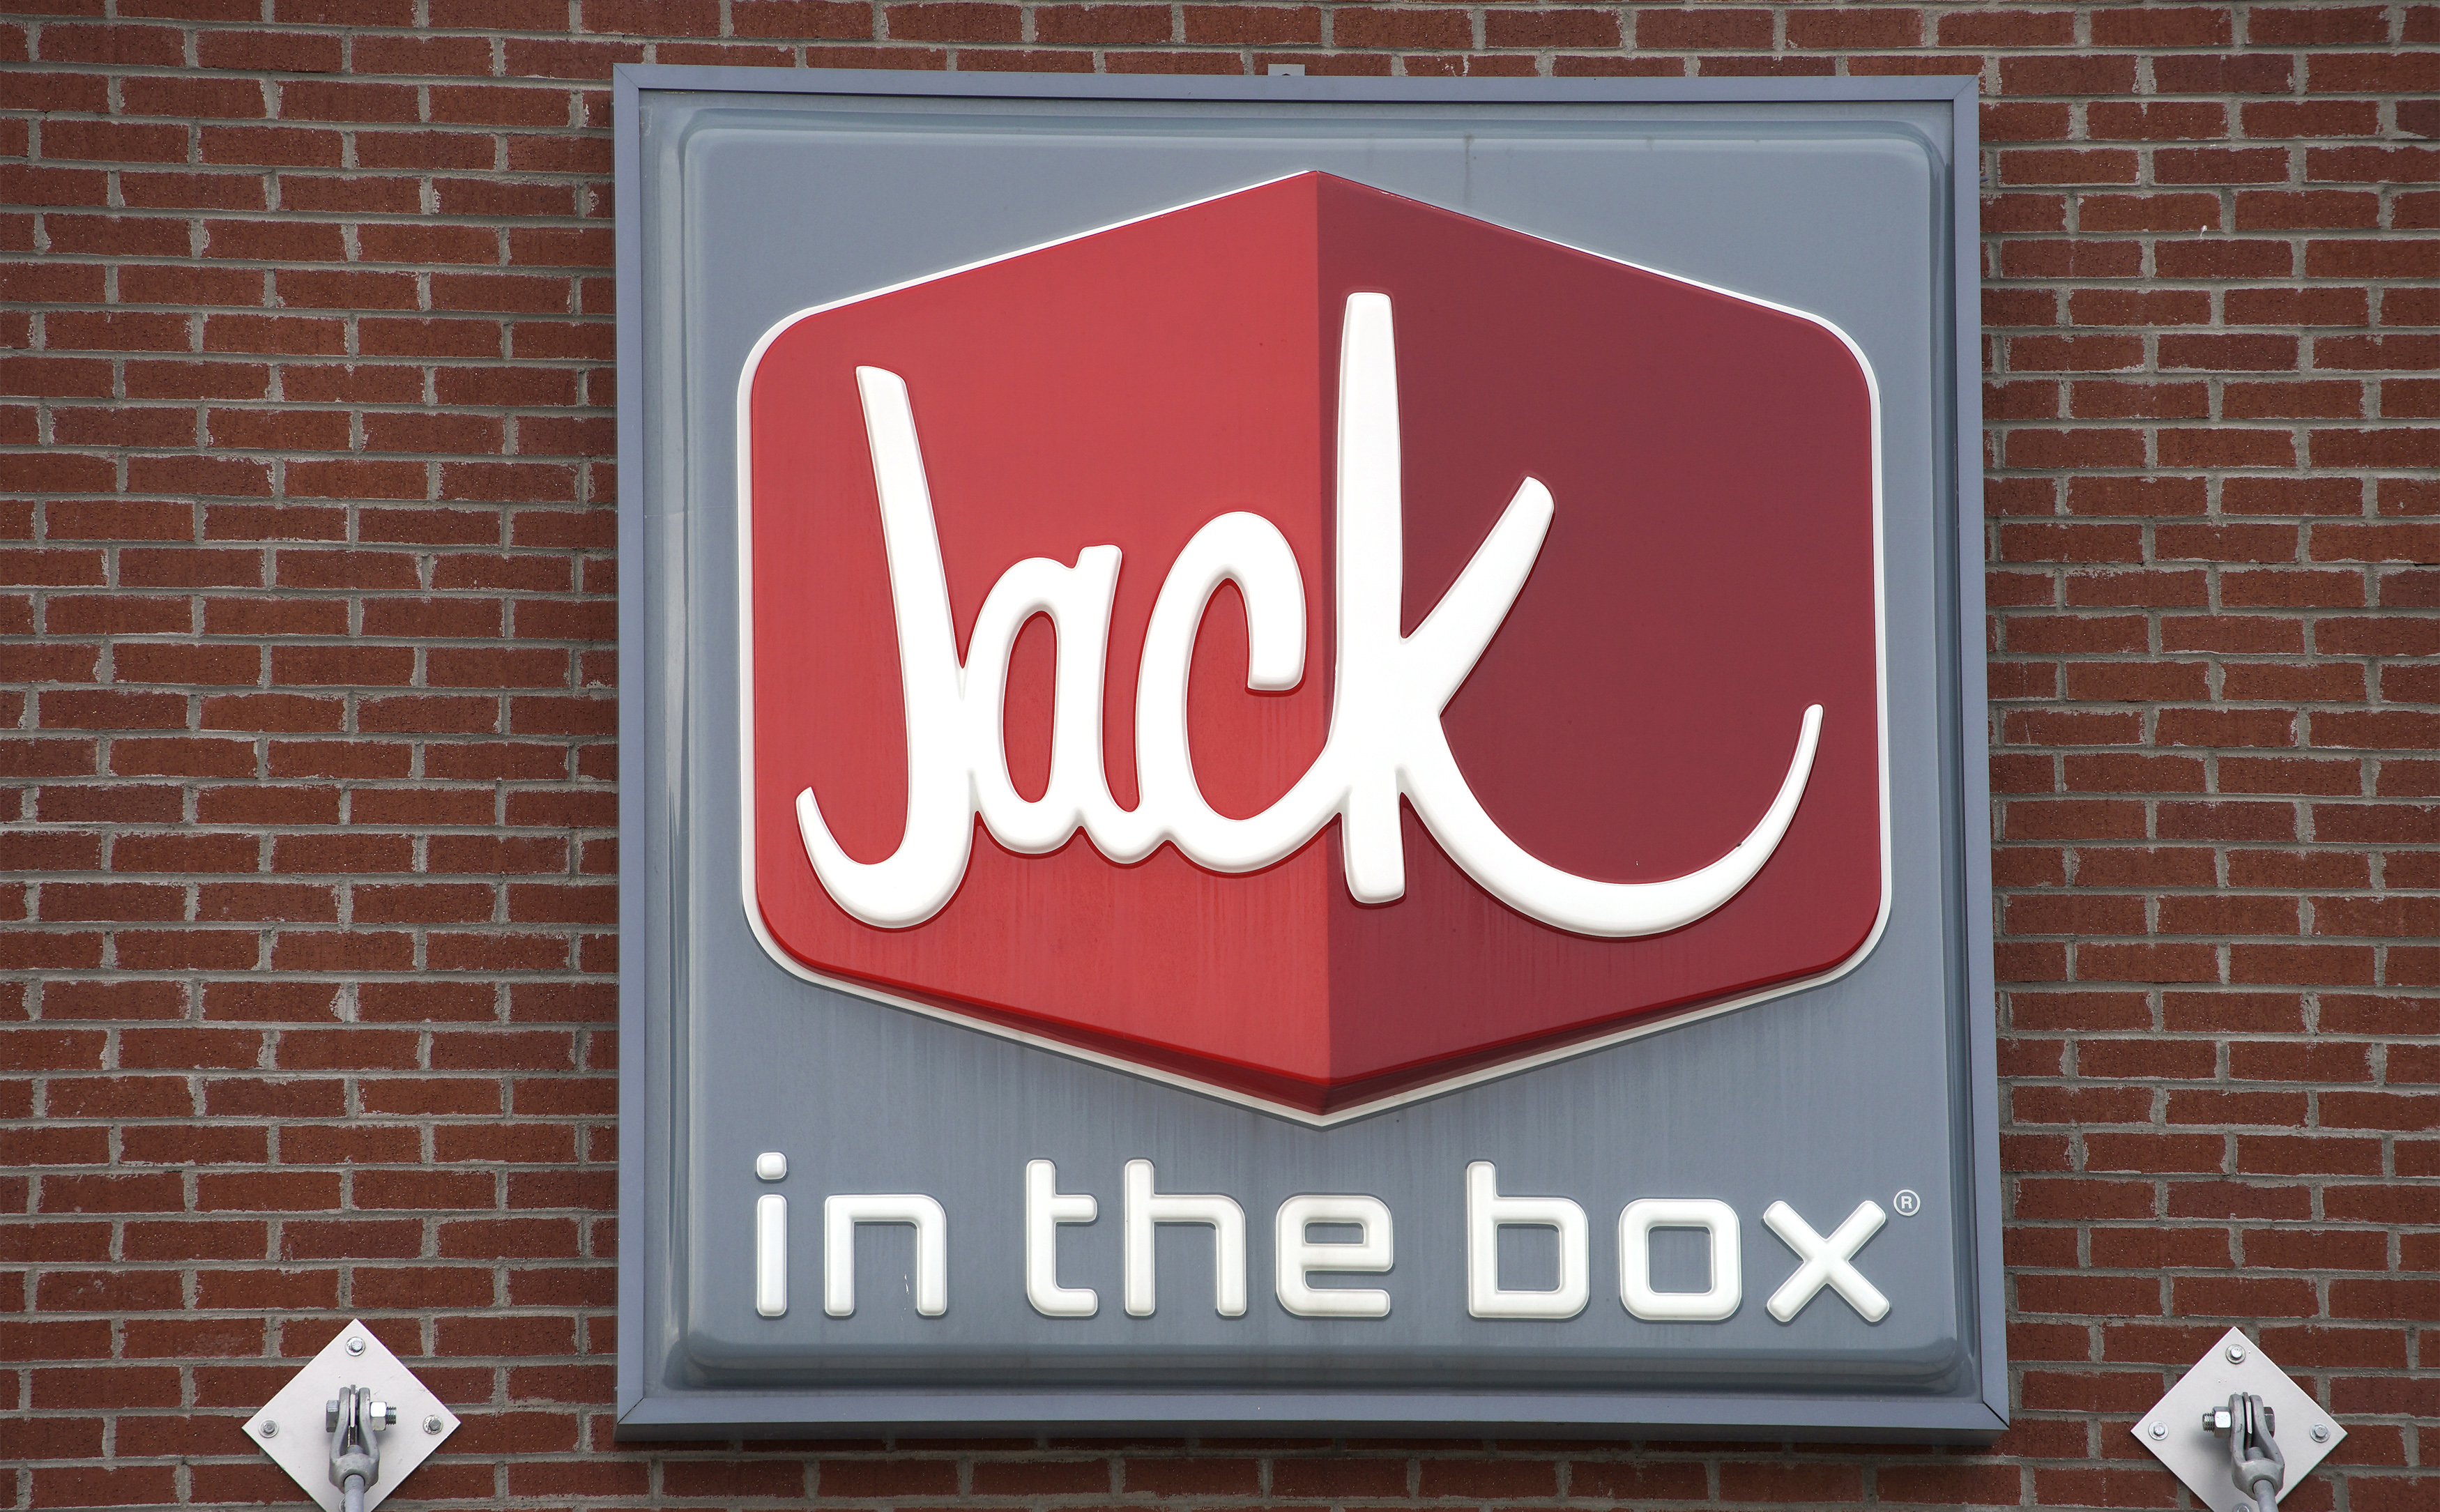 The Jack in the Box store in Broomfield, Colorado. November 18, 2014. REUTERS/Rick Wilking